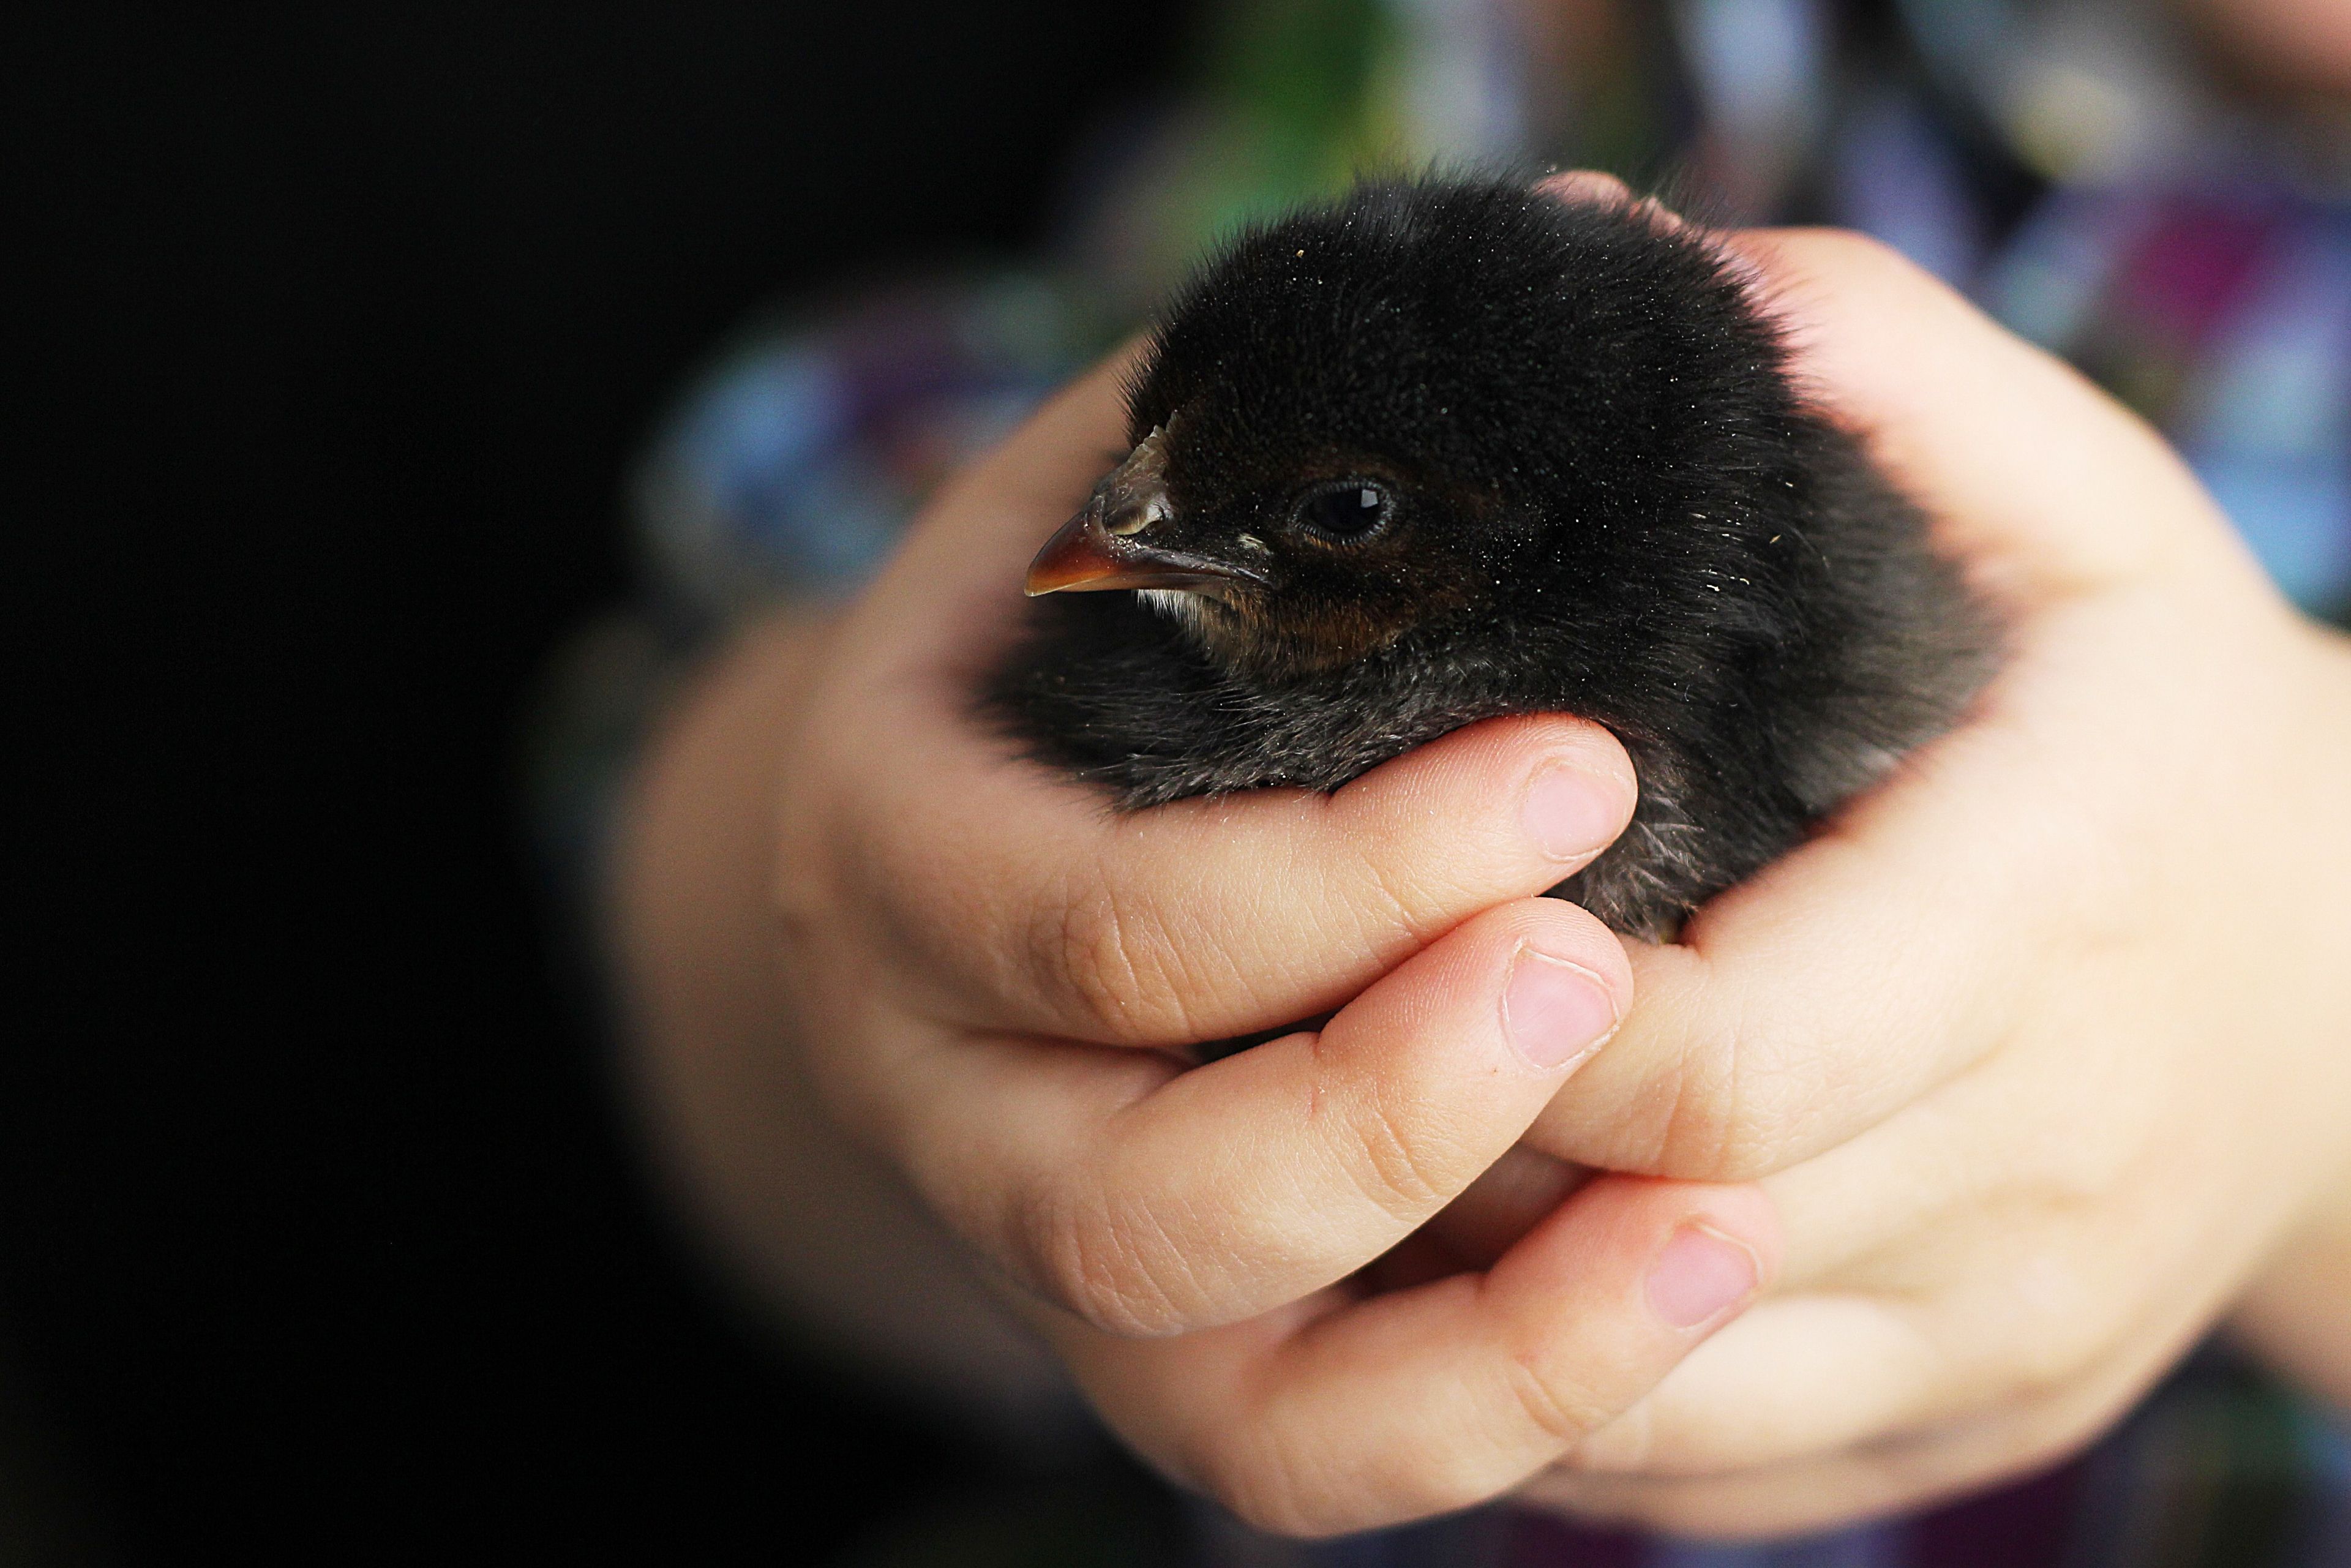 A person’s hands holding a baby chick.